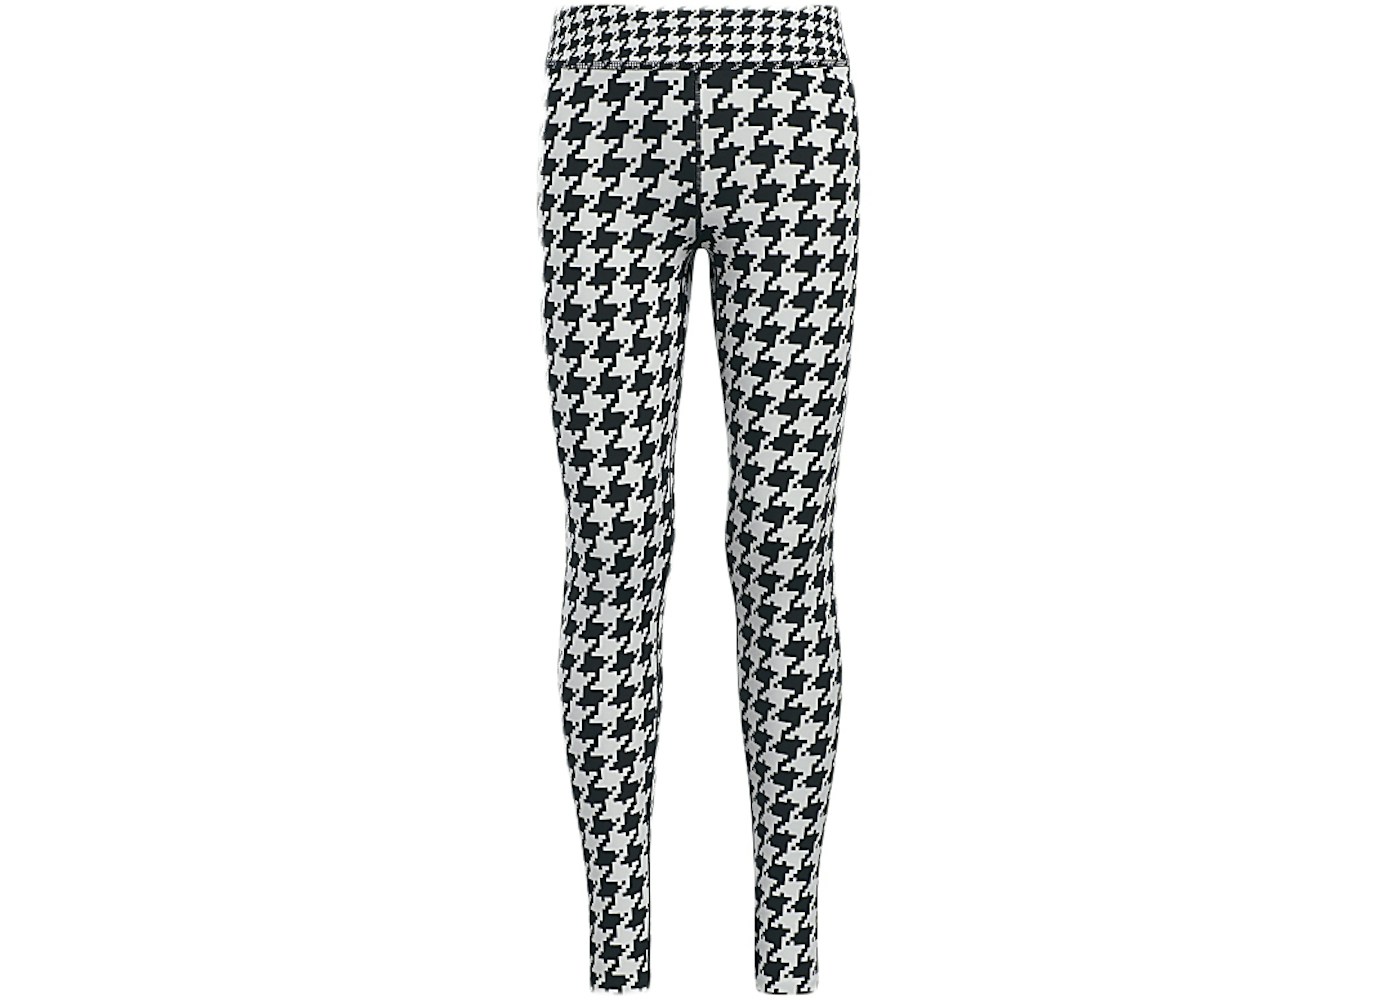 adidas Ivy Park Halls of Ivy Kids Houndstooth Tights Clear Grey/Black ...